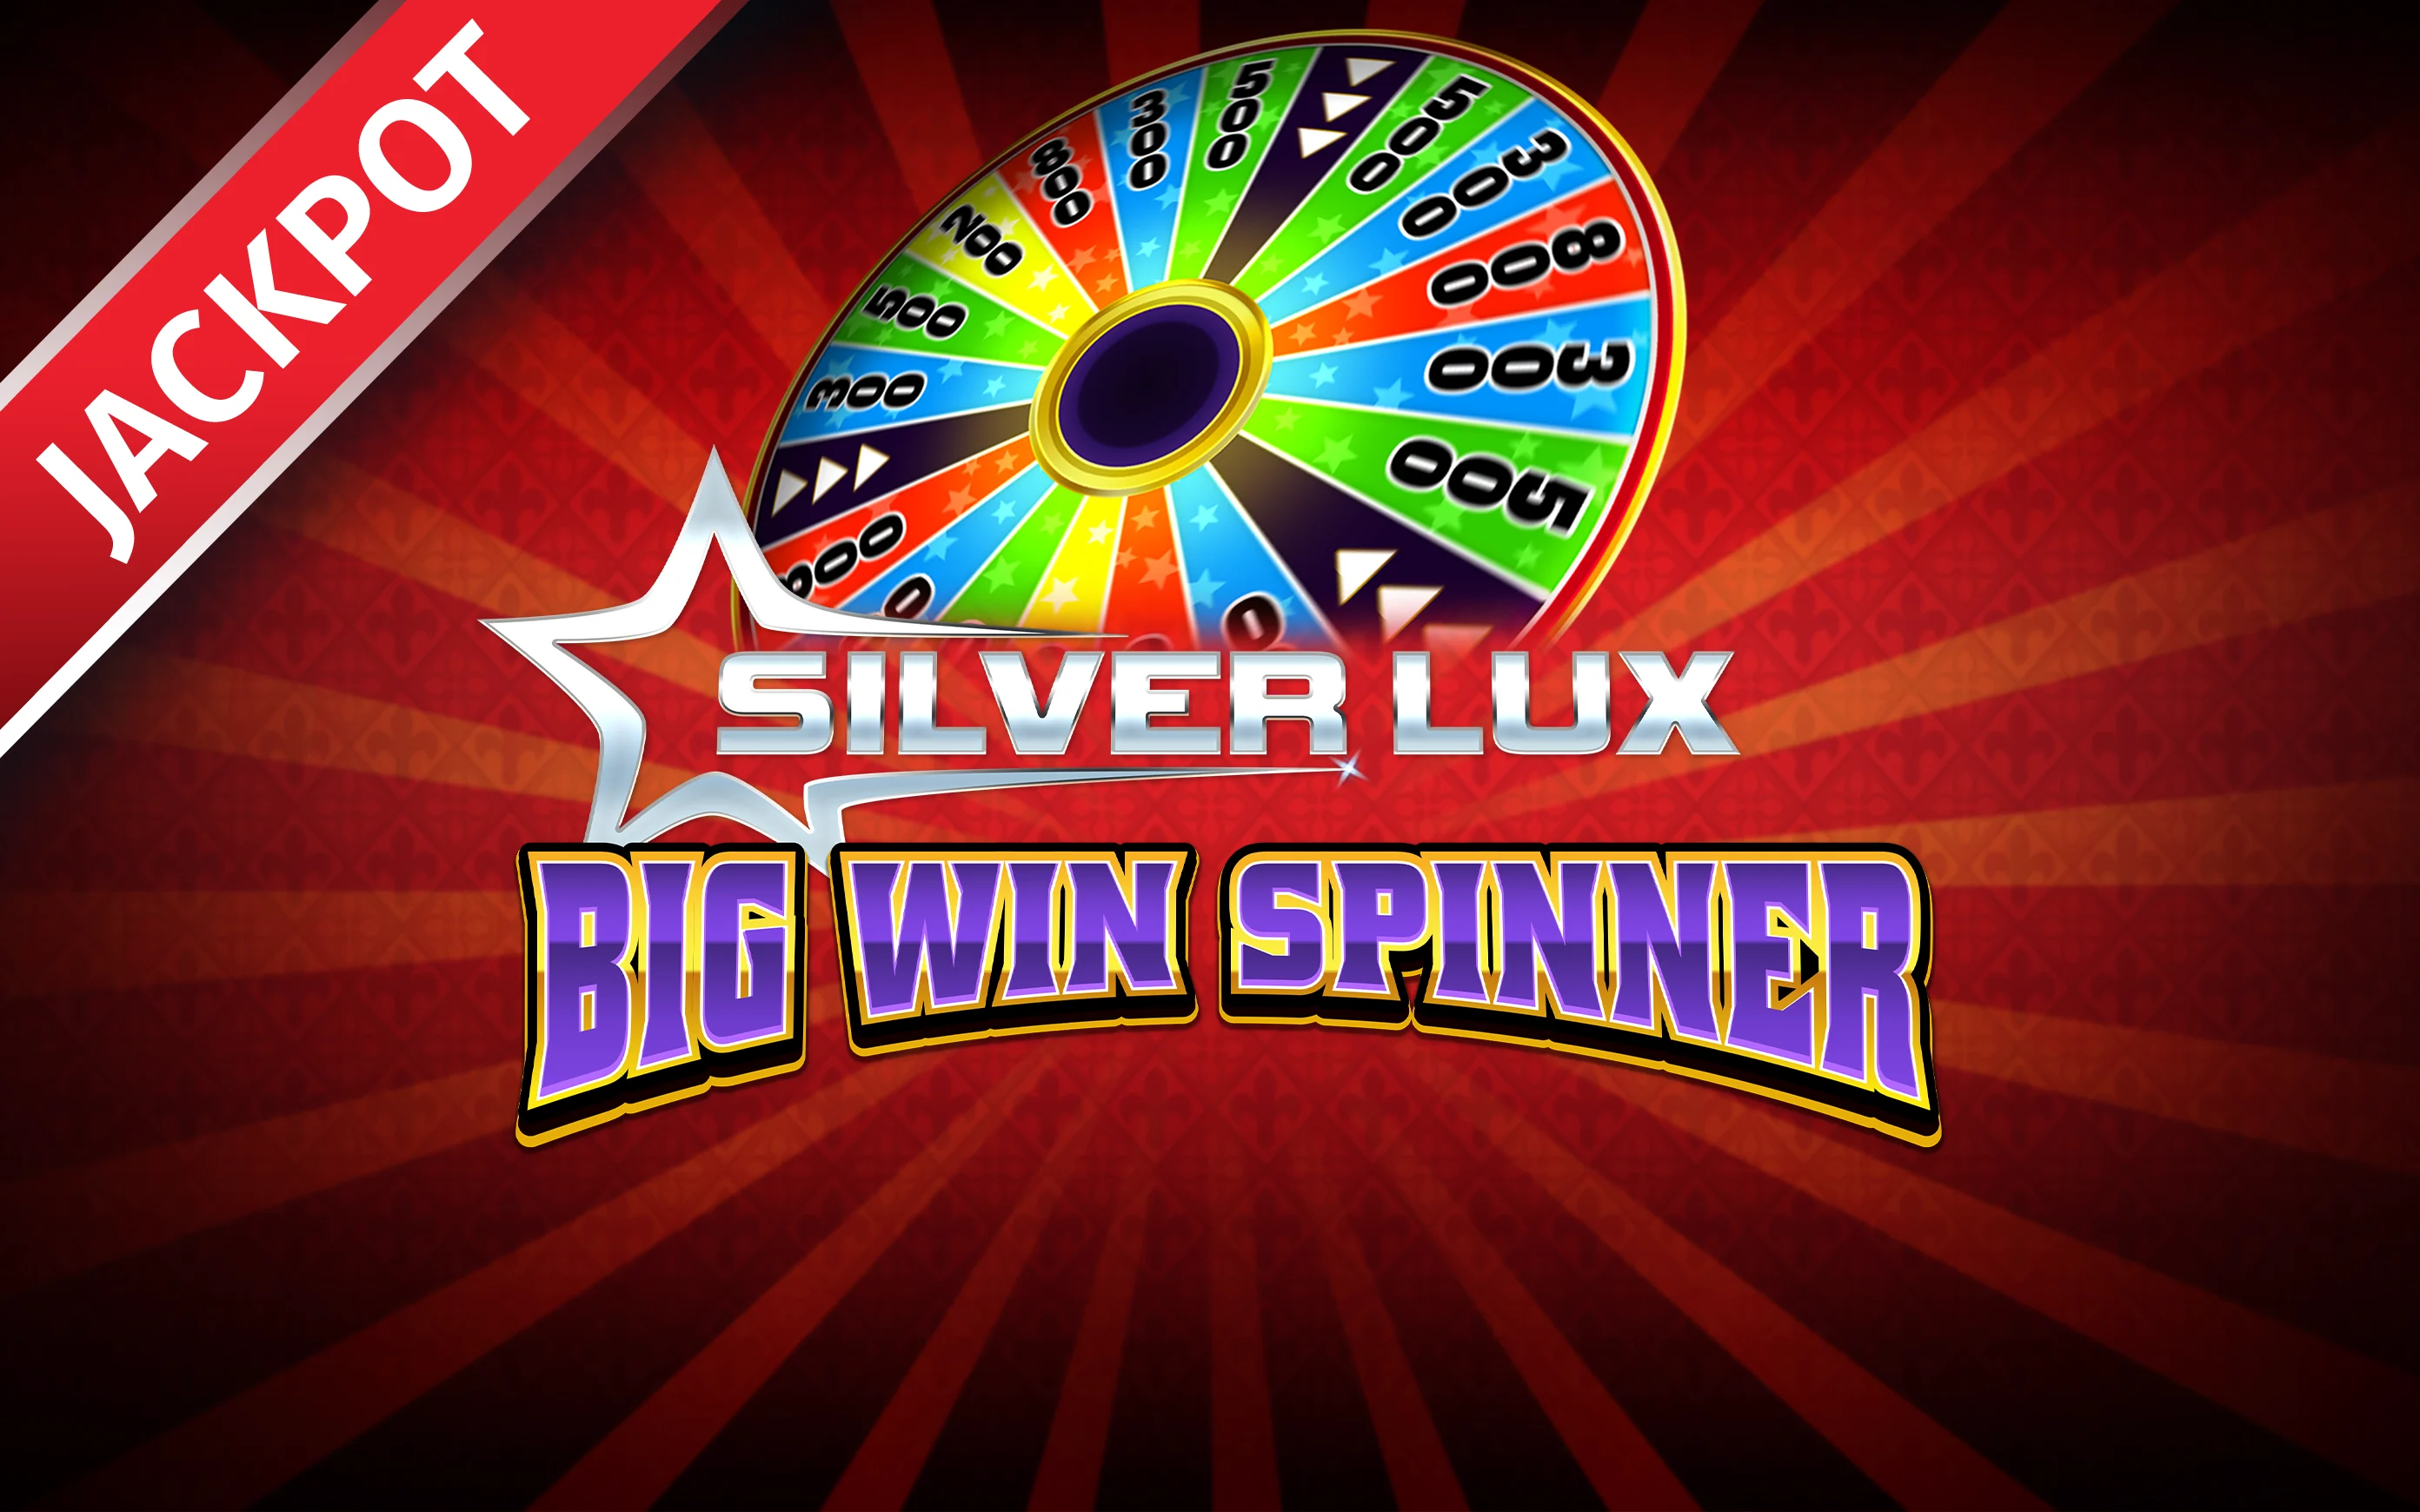 Play Silver Lux – Big Win Spinner on Starcasino.be online casino